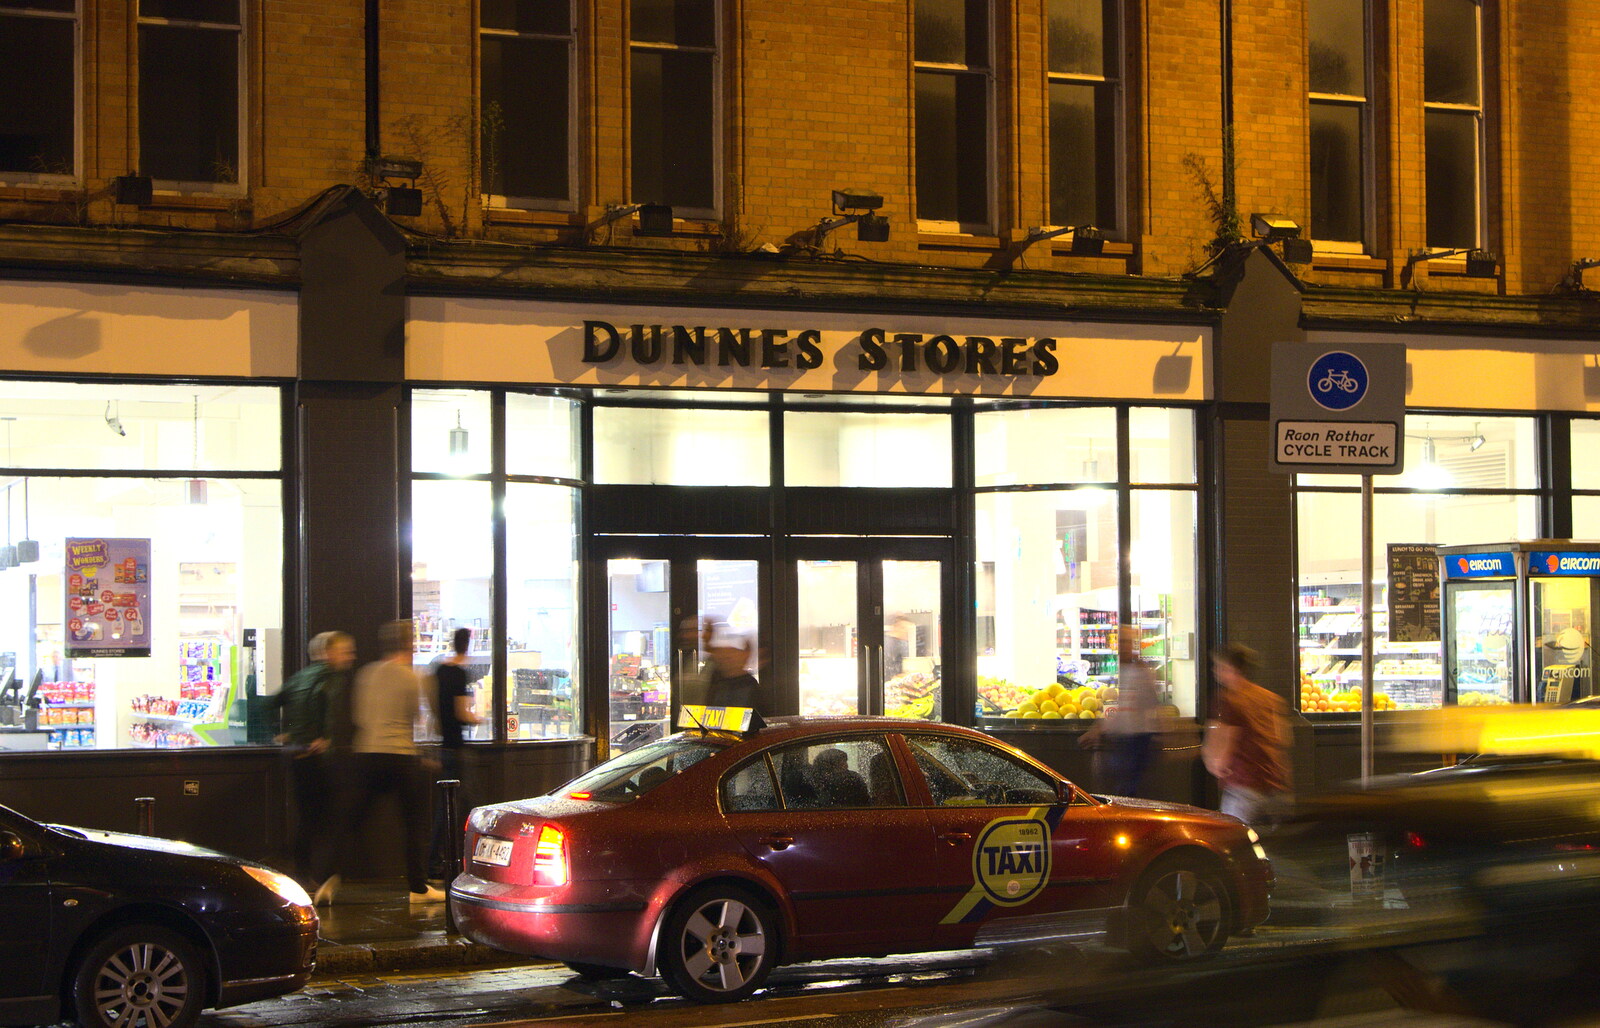 Dunnes Store on Henry Street from A Night Out in Dublin, County Dublin, Ireland - 9th August 2014